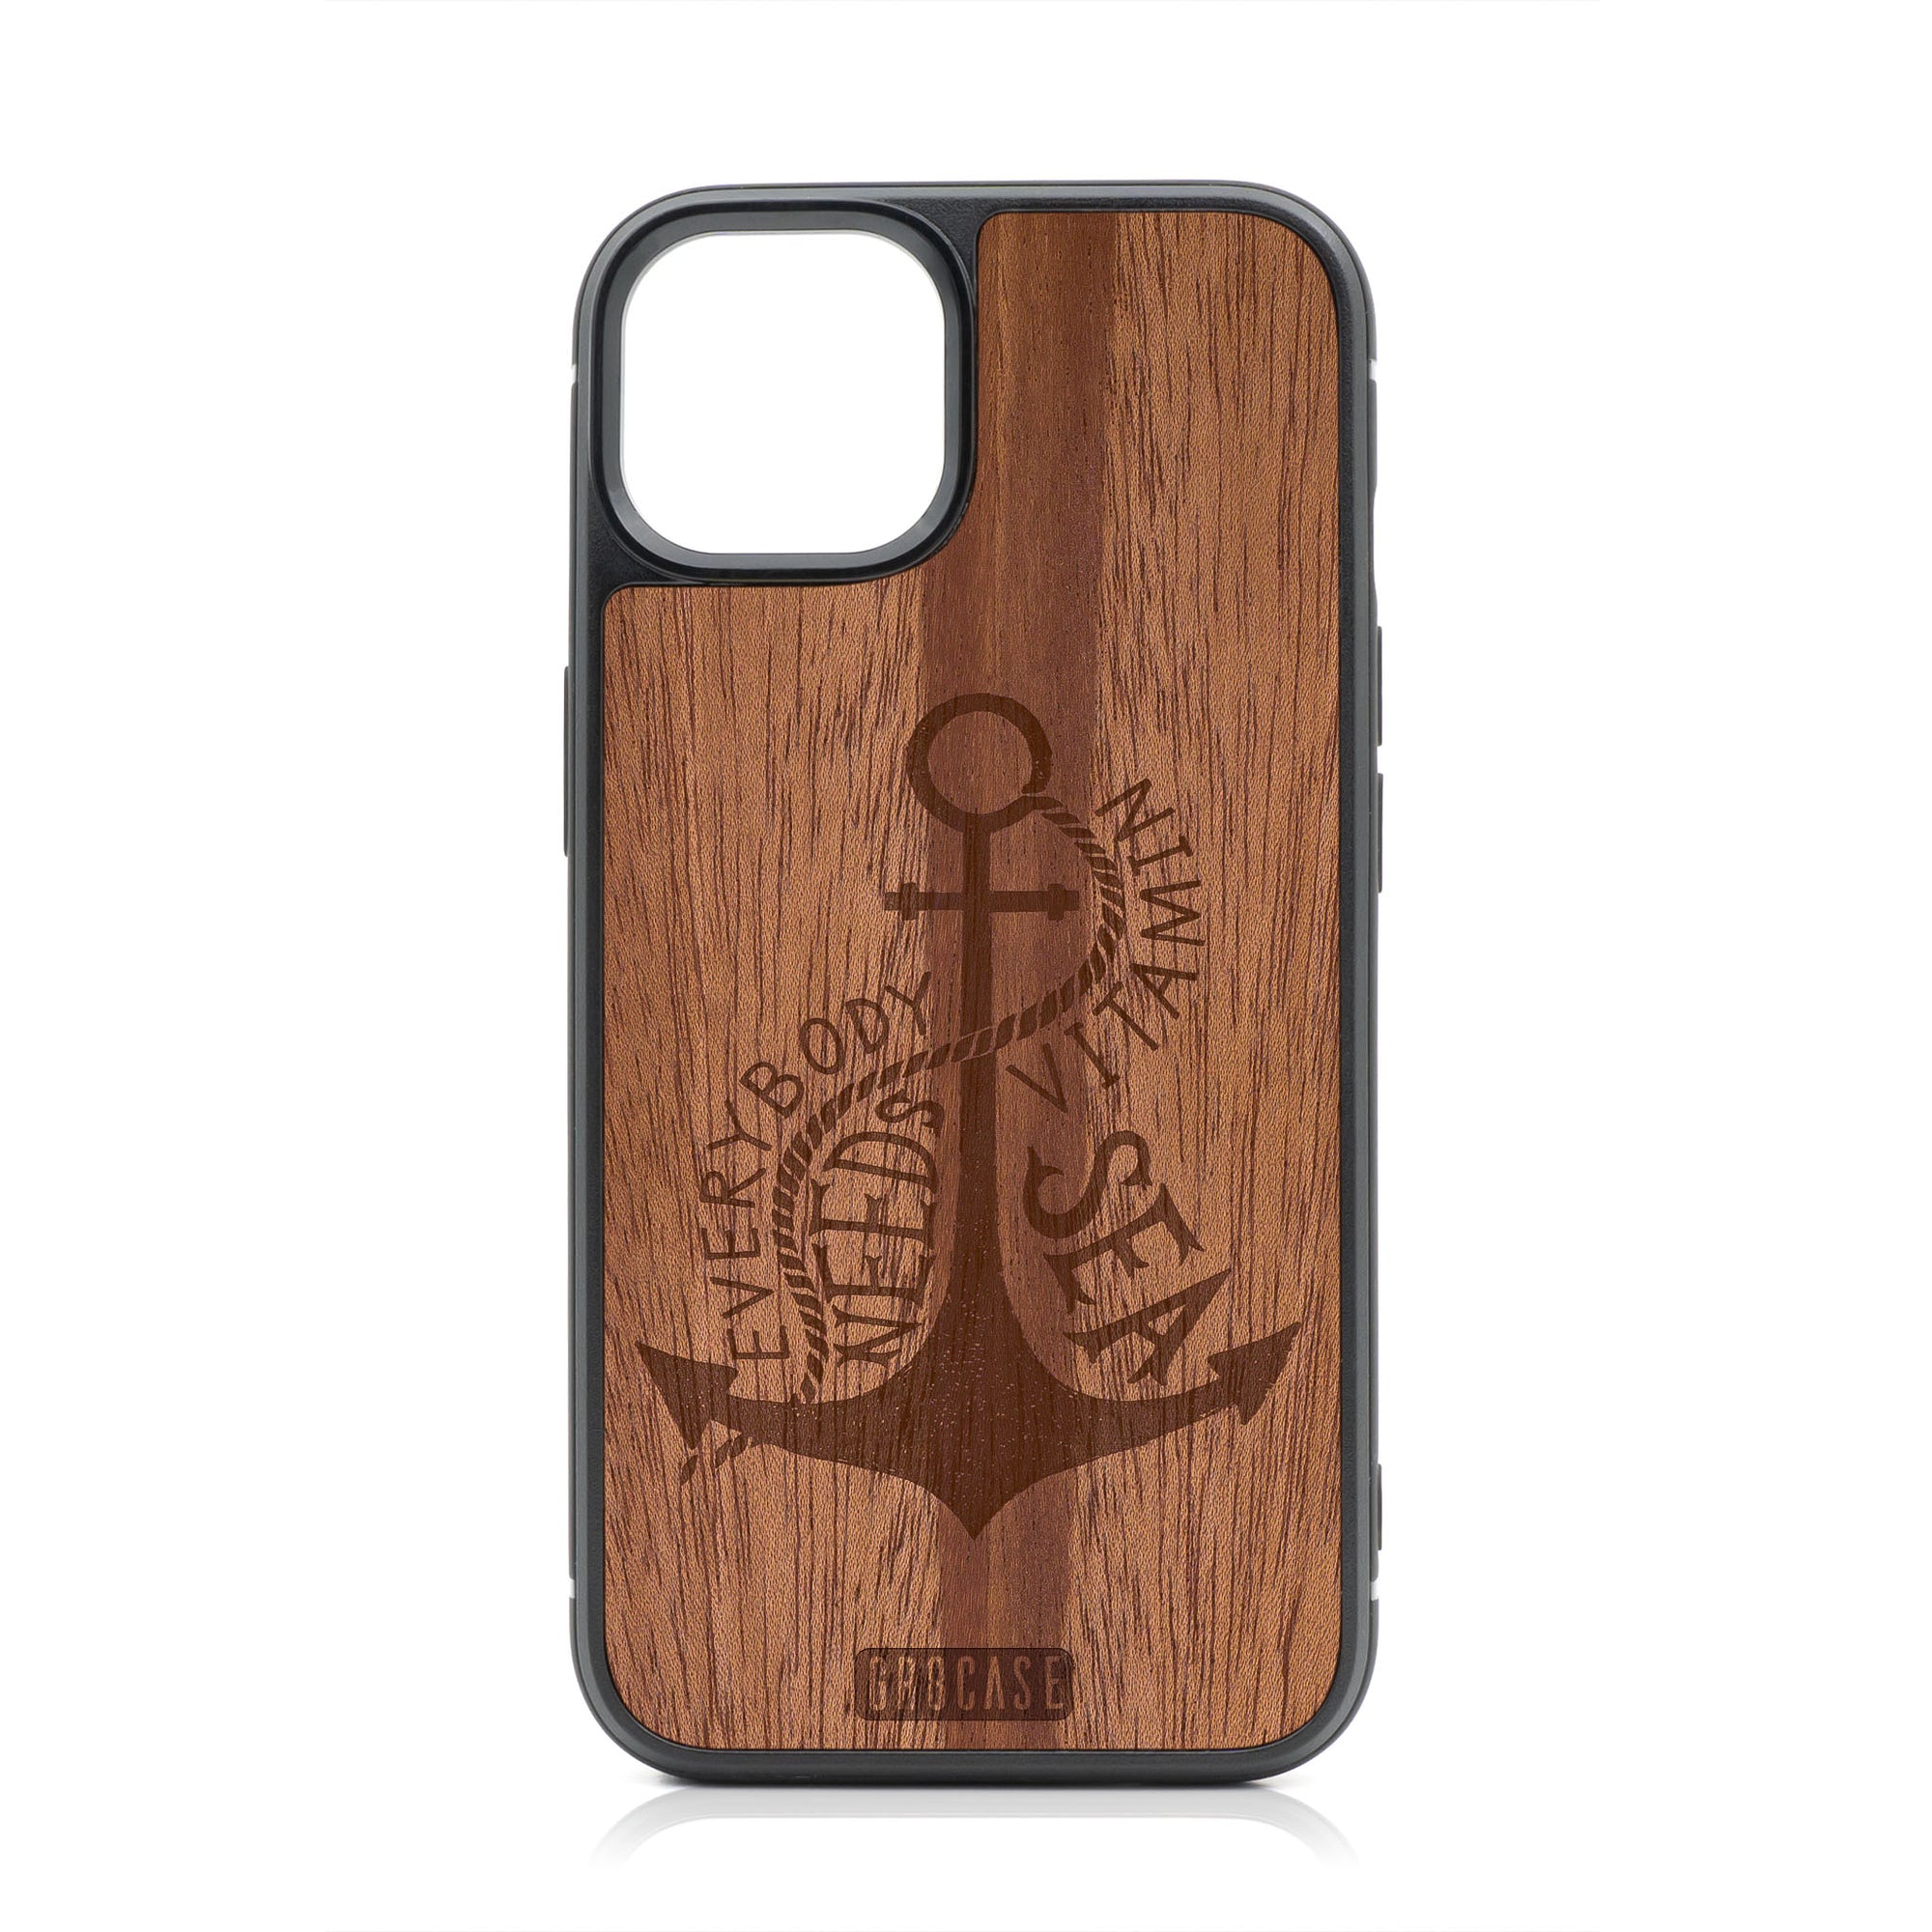 Everybody Needs Vitamin Sea (Anchor) Design Wood Case For iPhone 13